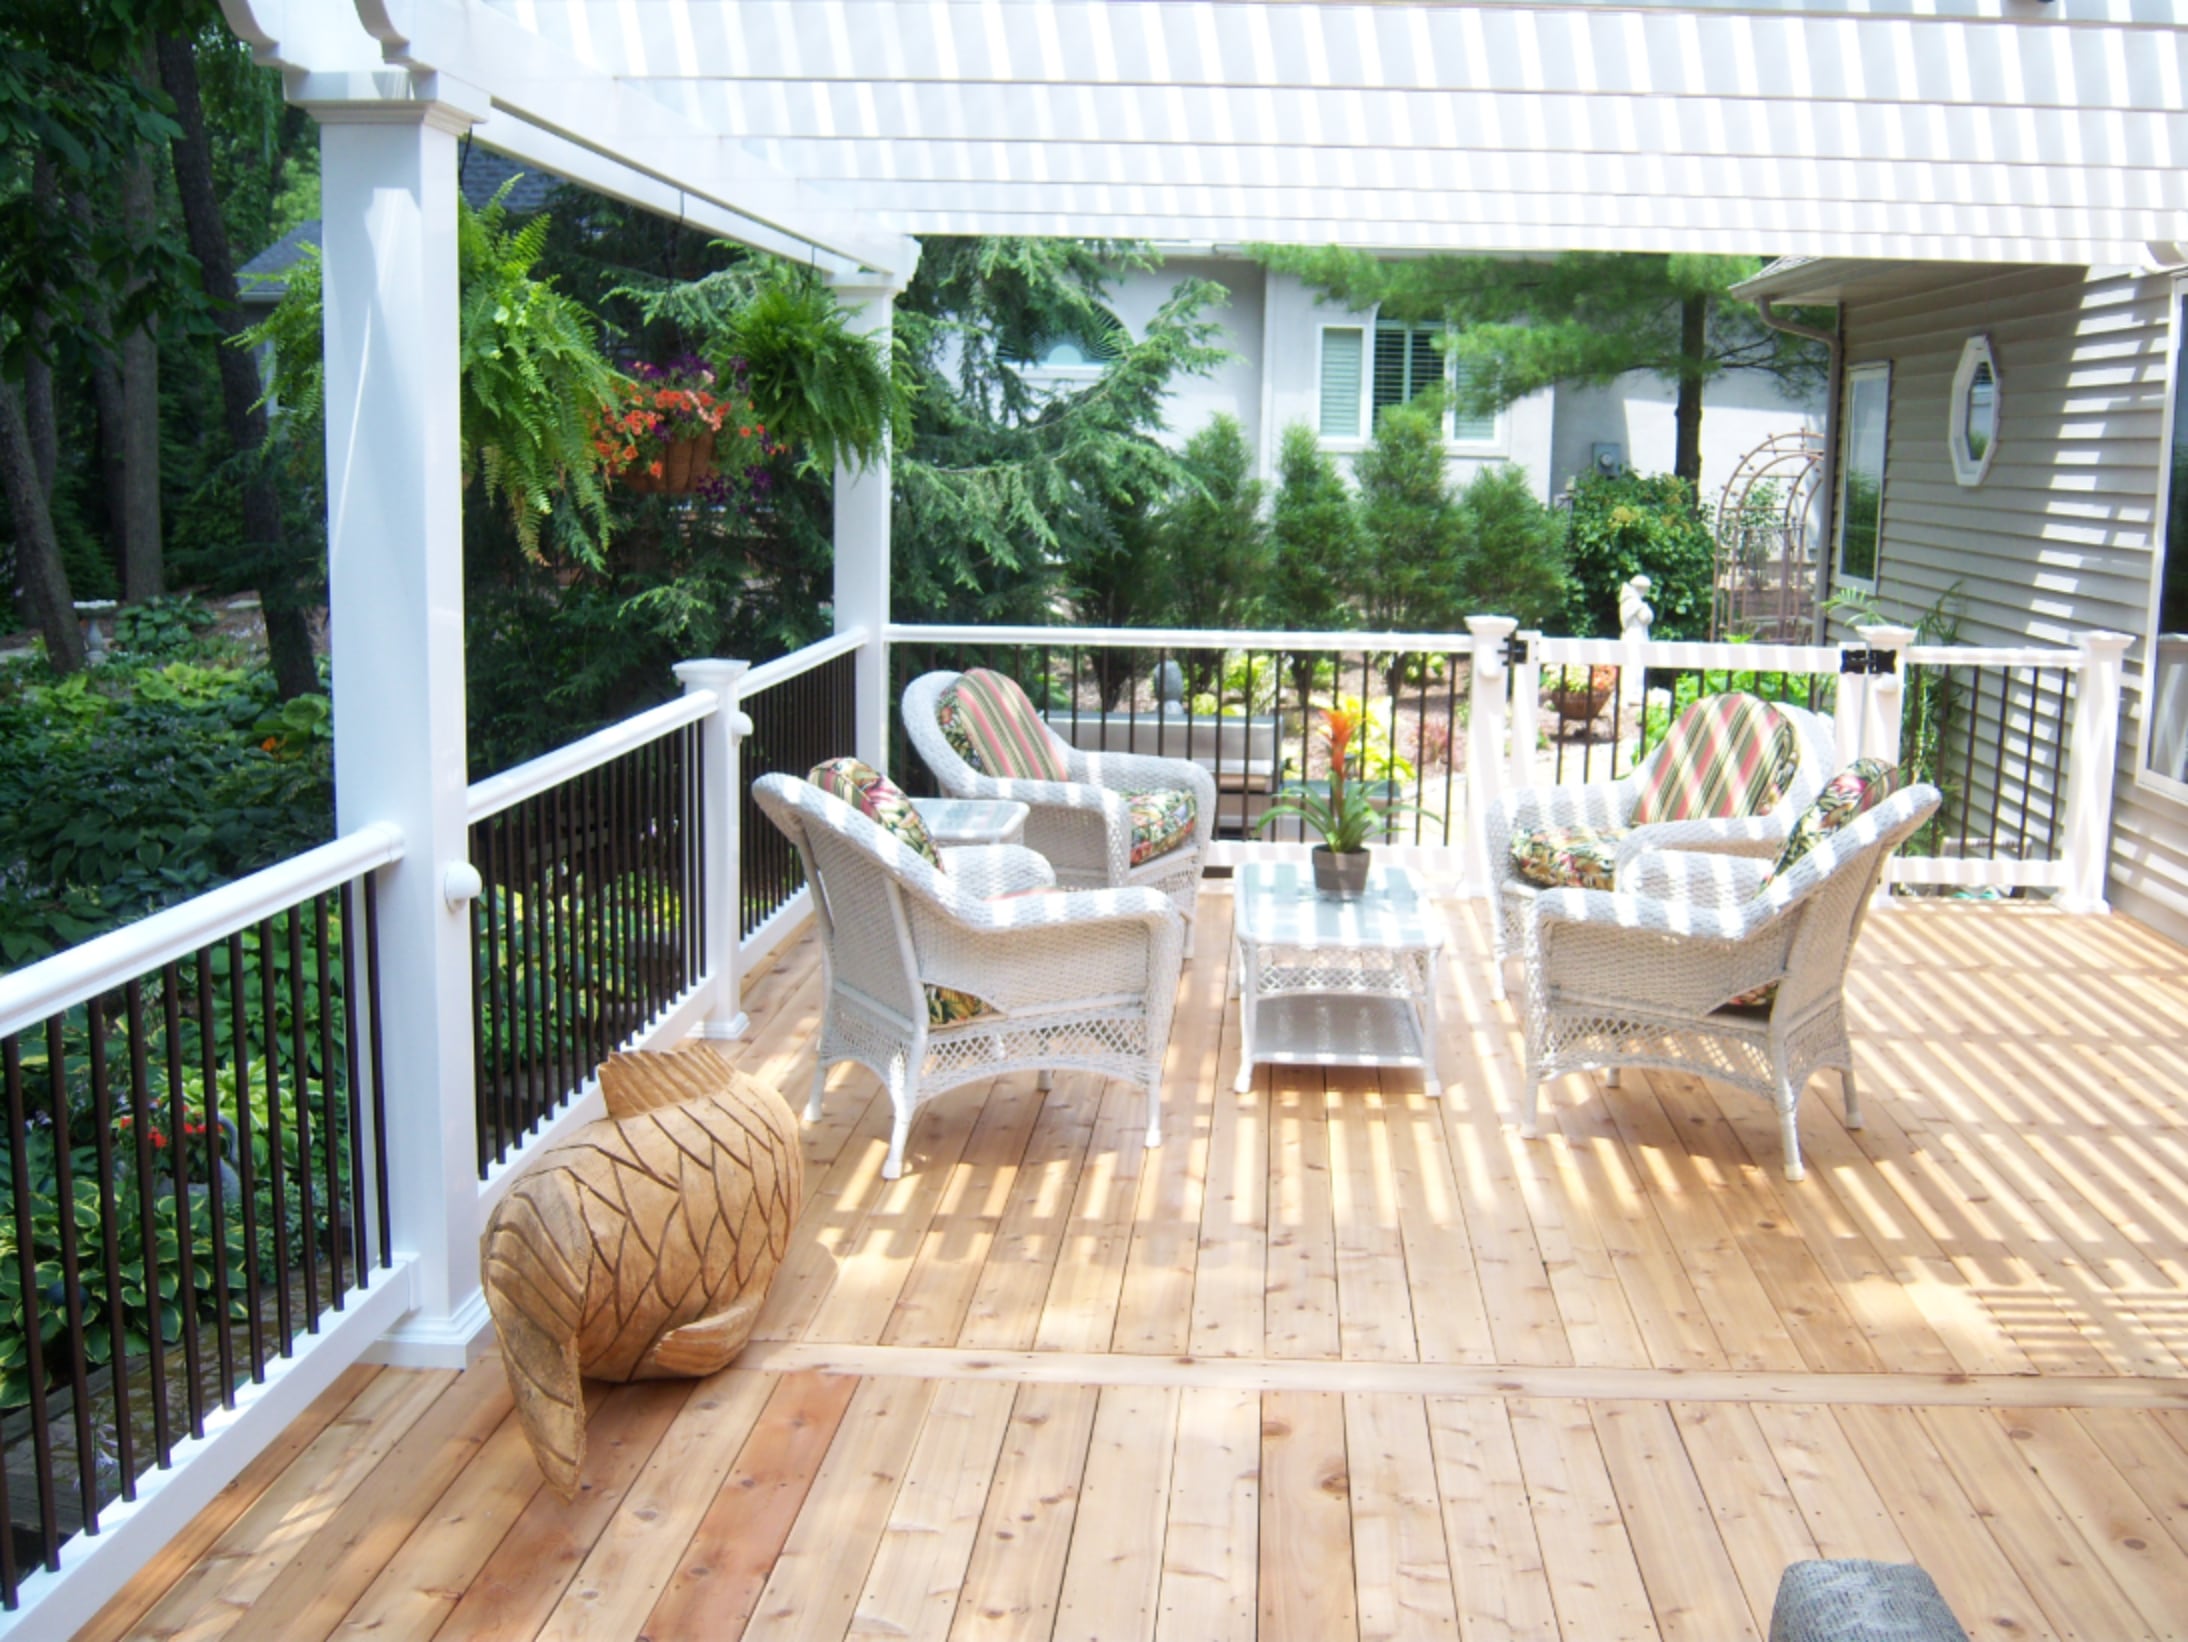 This porch has light wood floors, a white pergola and a white and black railing. There is a seating area with white wicker furniture and striped cushions.